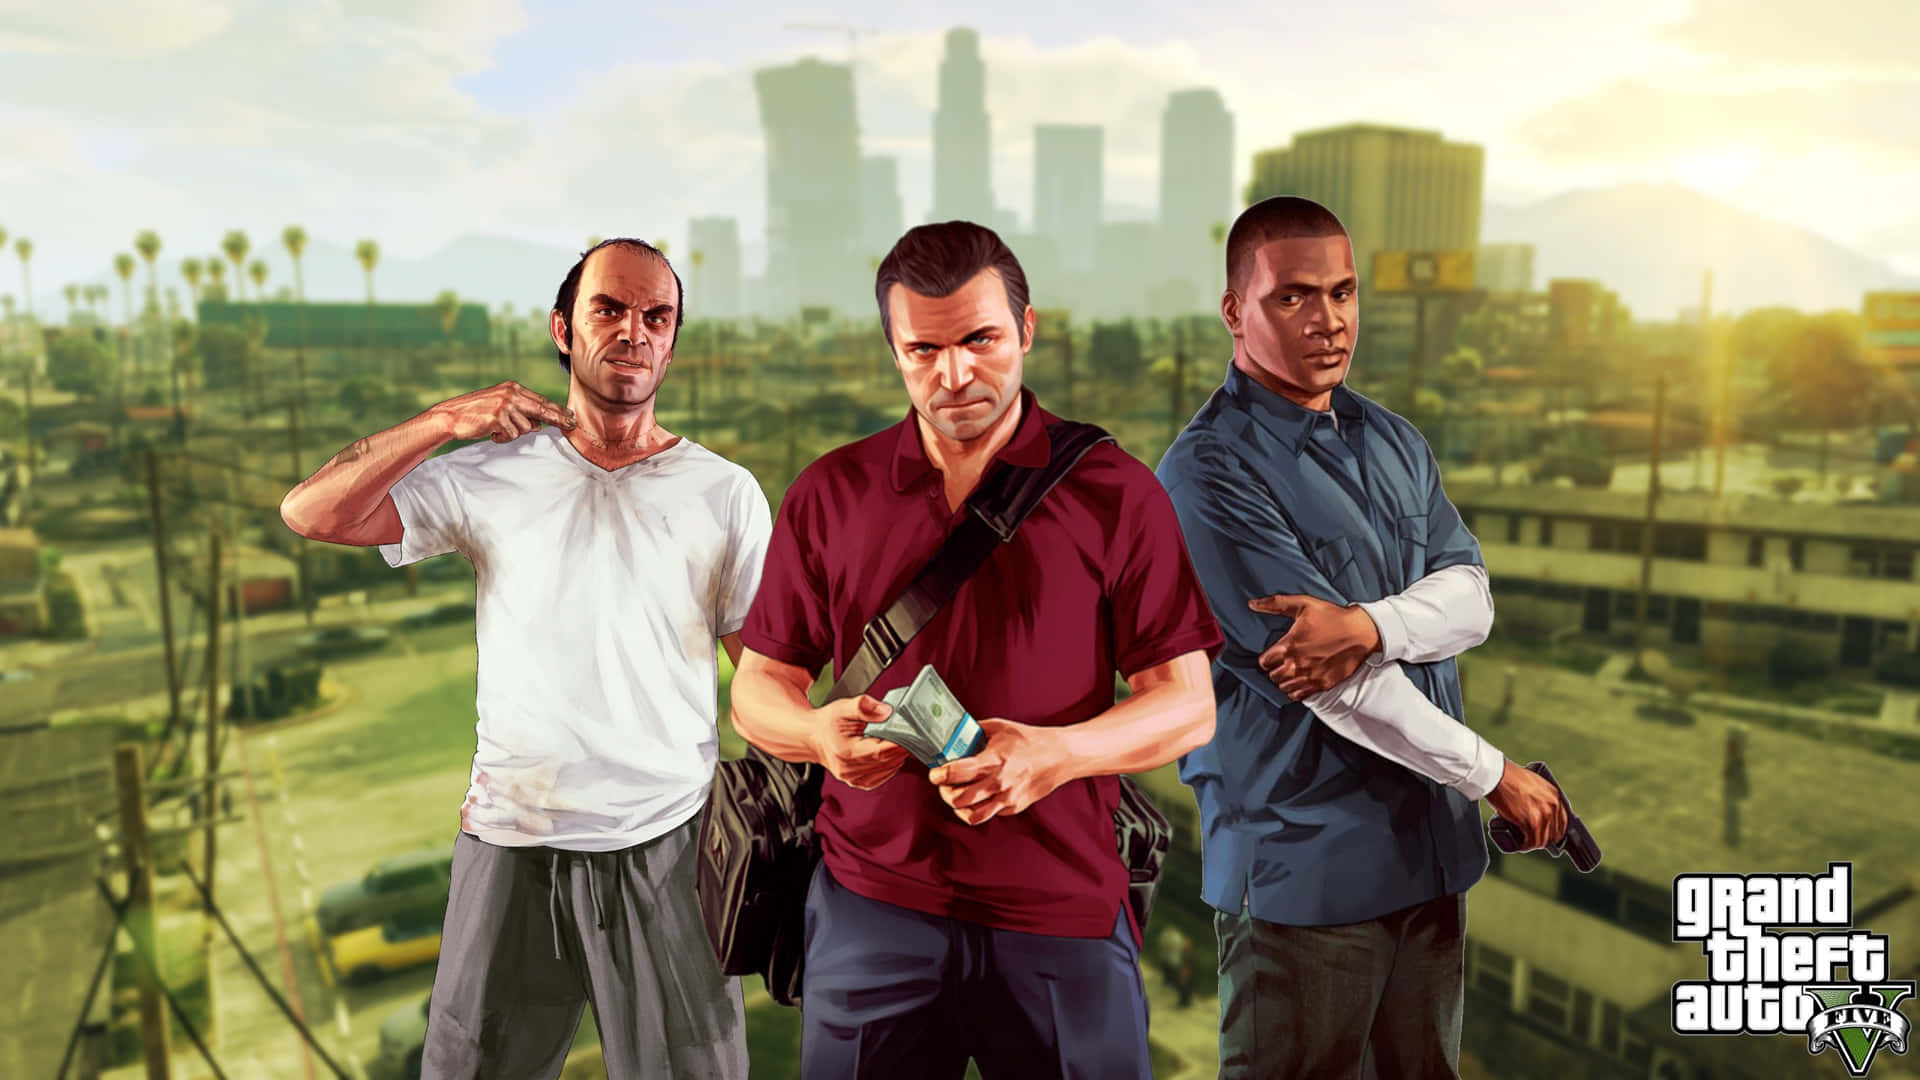 Classic Grand Theft Auto V game, now in stunning 2560x1440 resolution. Wallpaper